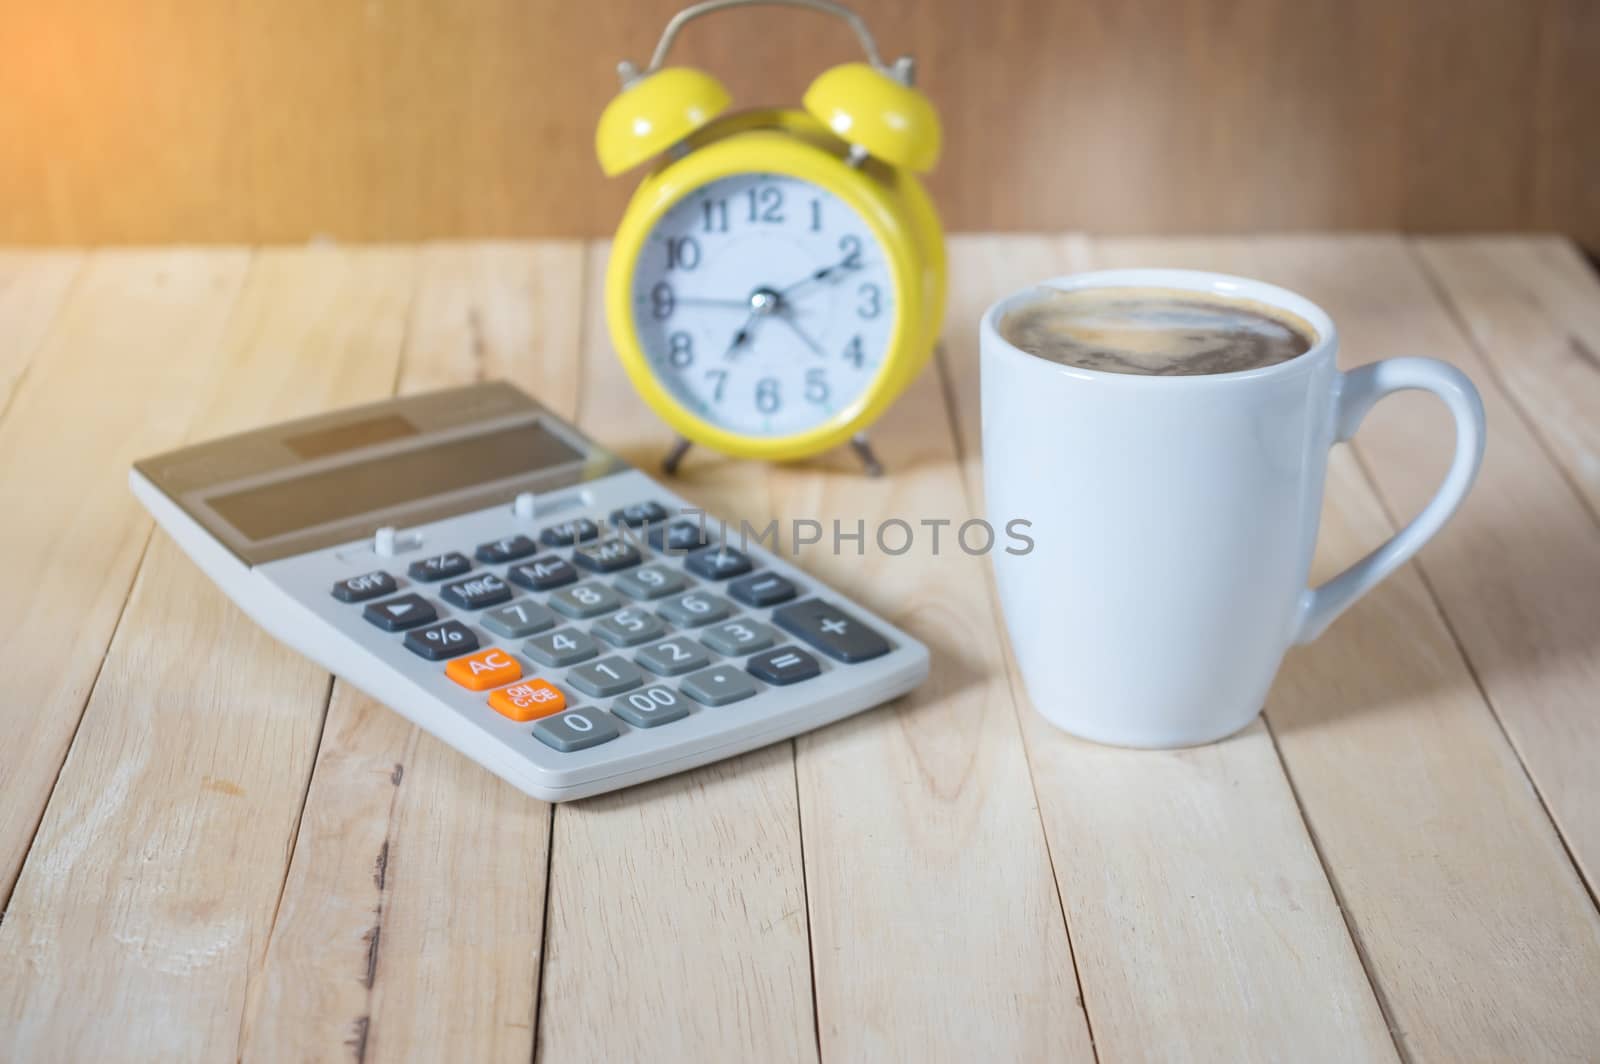 A cup of coffee on the table with calculator and clock.